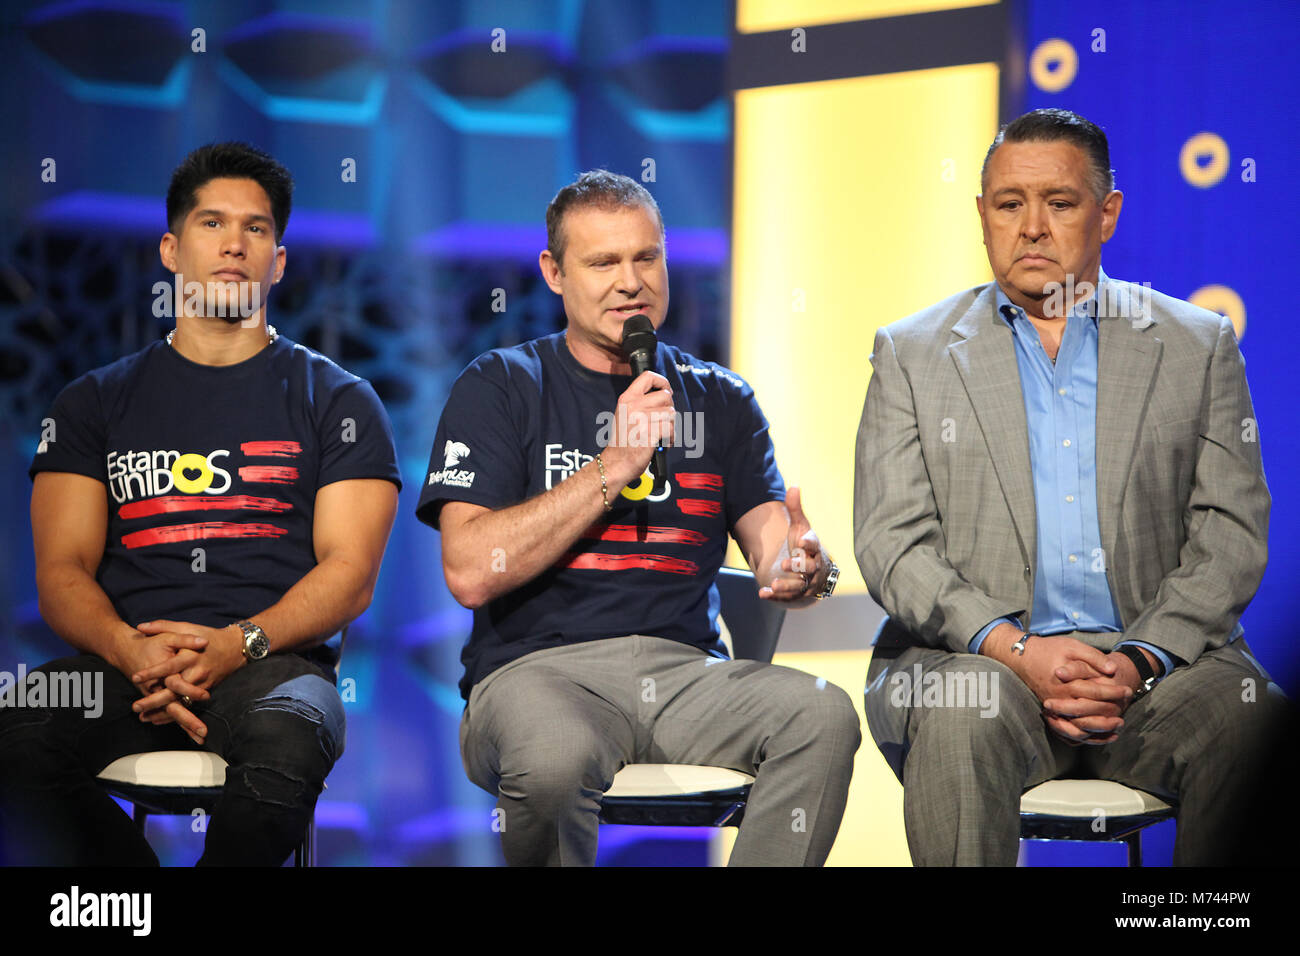 Doral, FL, USA. 8th Mar, 2018. Chyno Miranda, Alan Tacher and Pablo Ramirez Gomez pictured at the press conference for Teleton USA 2018 at Univision Studios in Doral, Florida on March 8, 2018. Credit: Majo Grossi/Media Punch/Alamy Live News Stock Photo